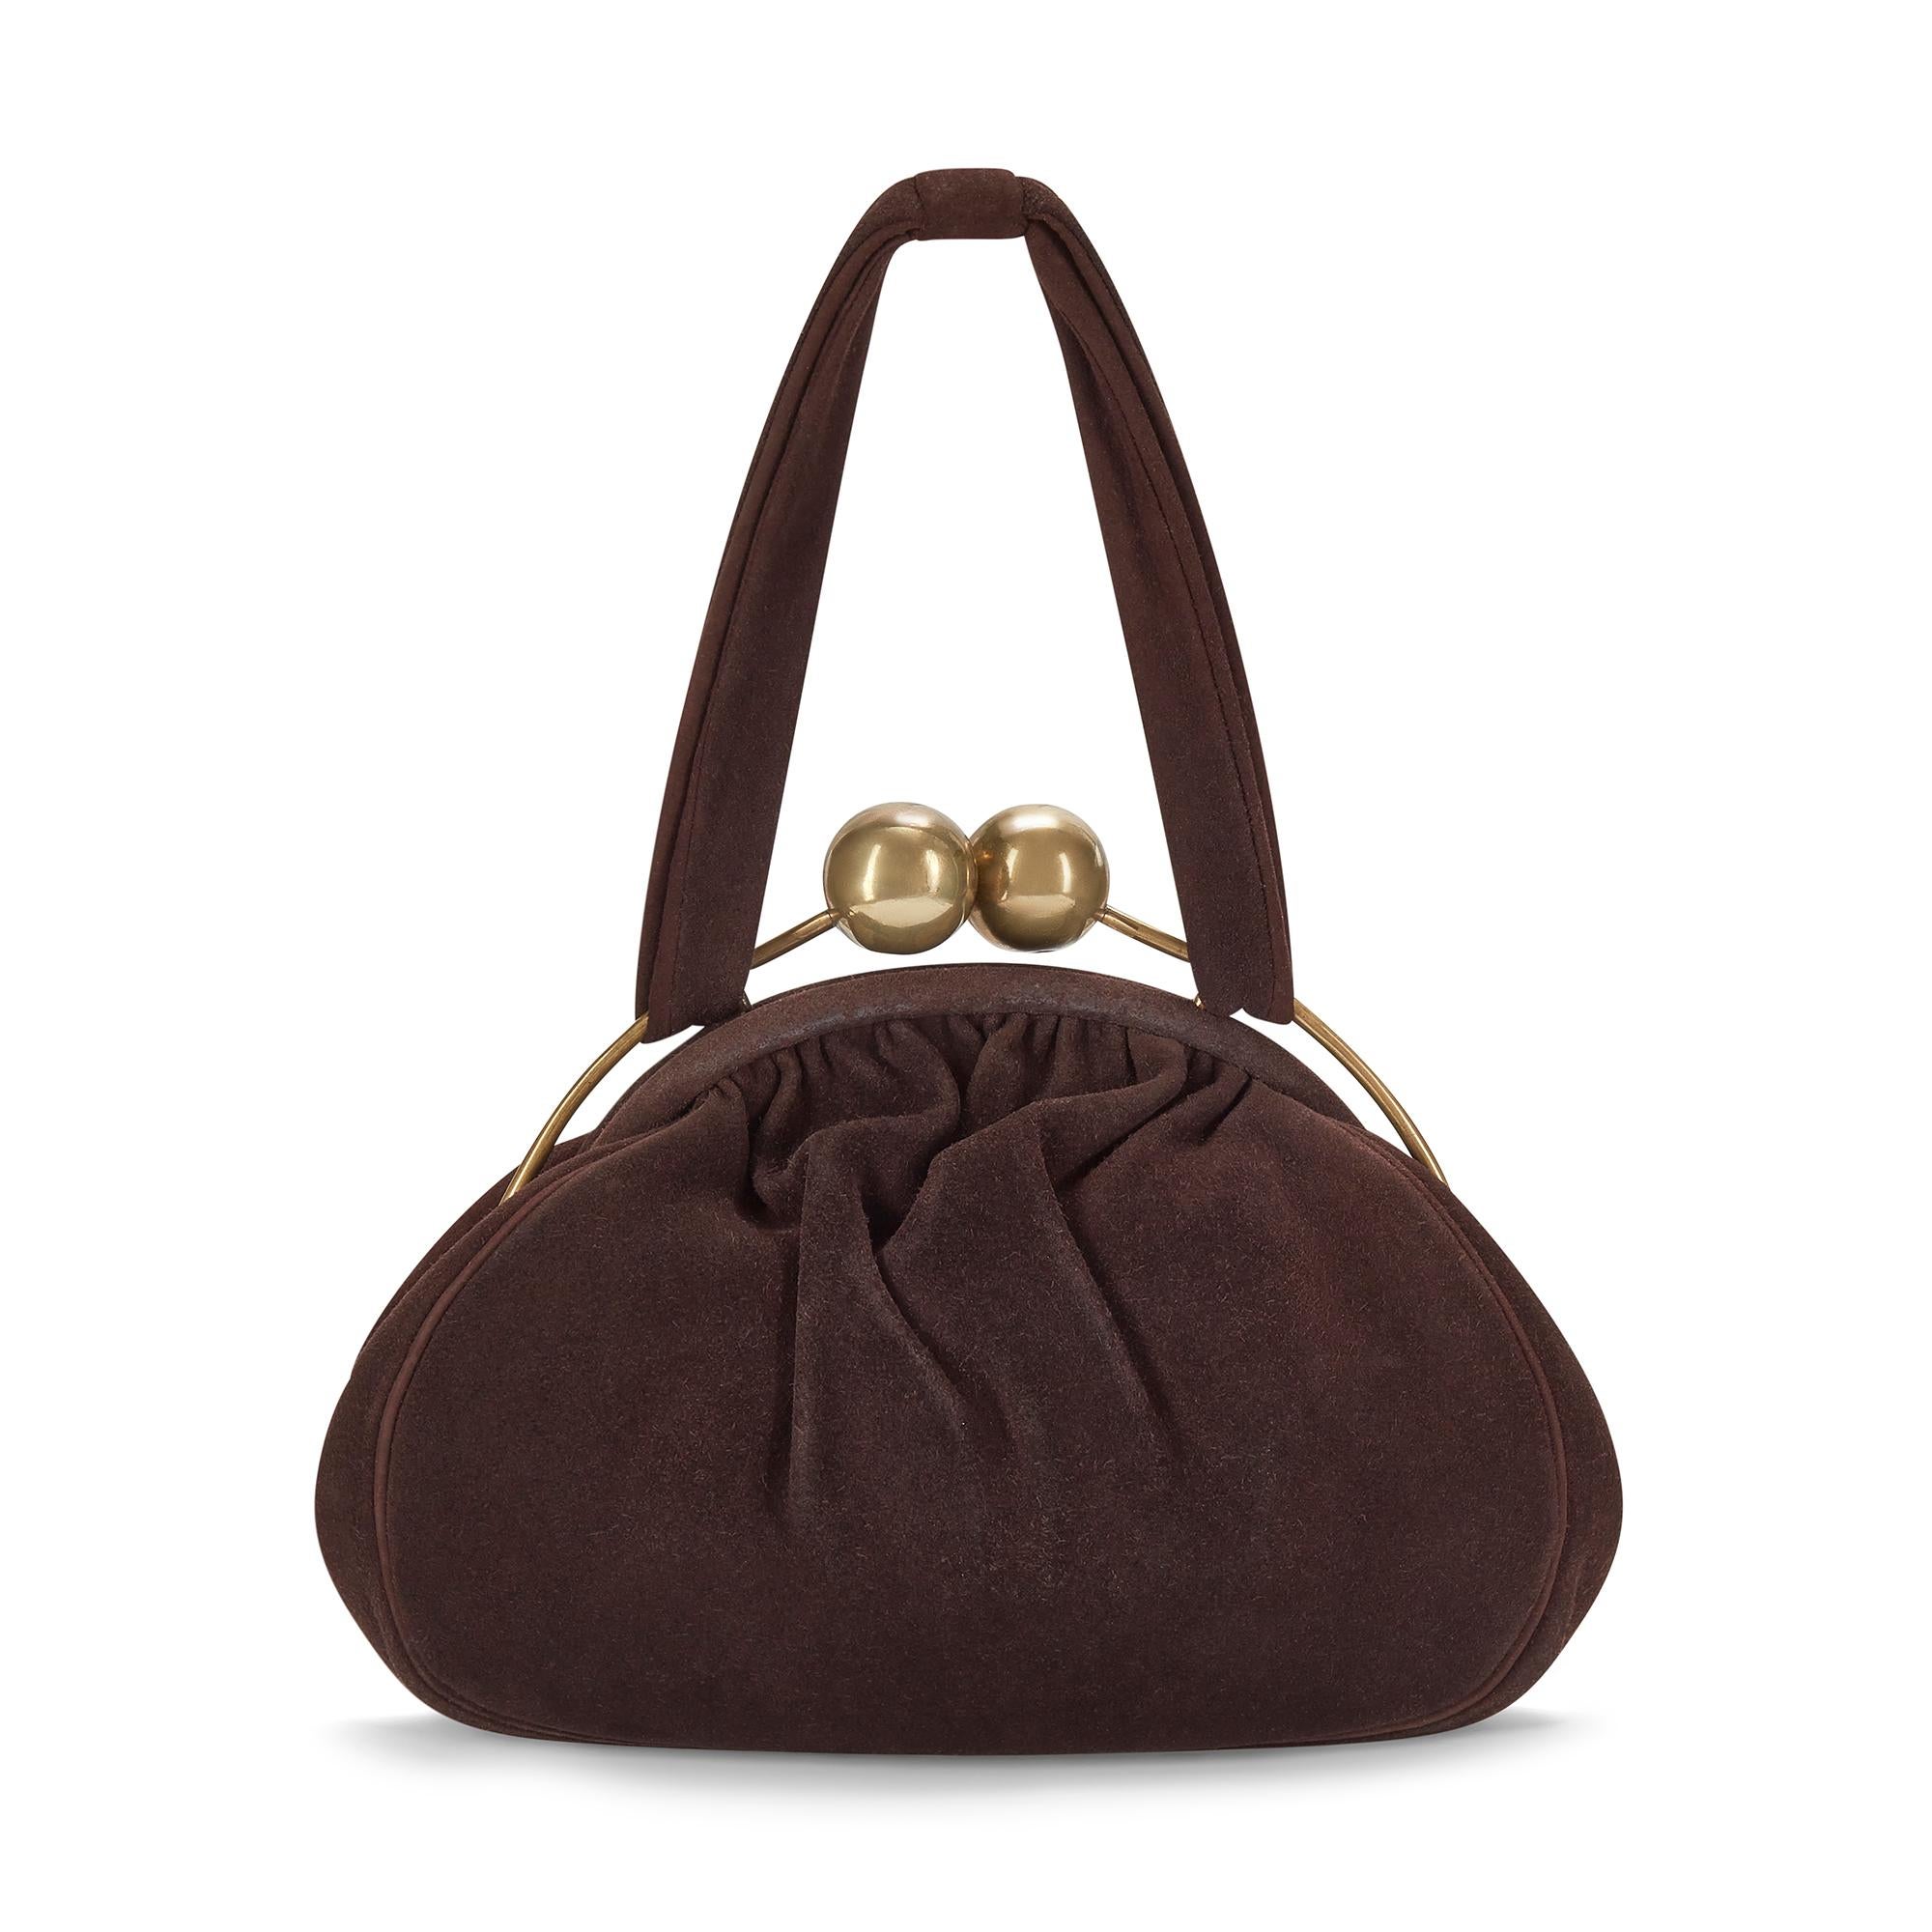 This unusual late 1940s bag is crafted from luxurious, rich brown suede in a pouch-like shape. The brass hardware is exposed at the top of the bag and fastens with two chunky oversized spheres that form a clasp. This tactile bag is lined with